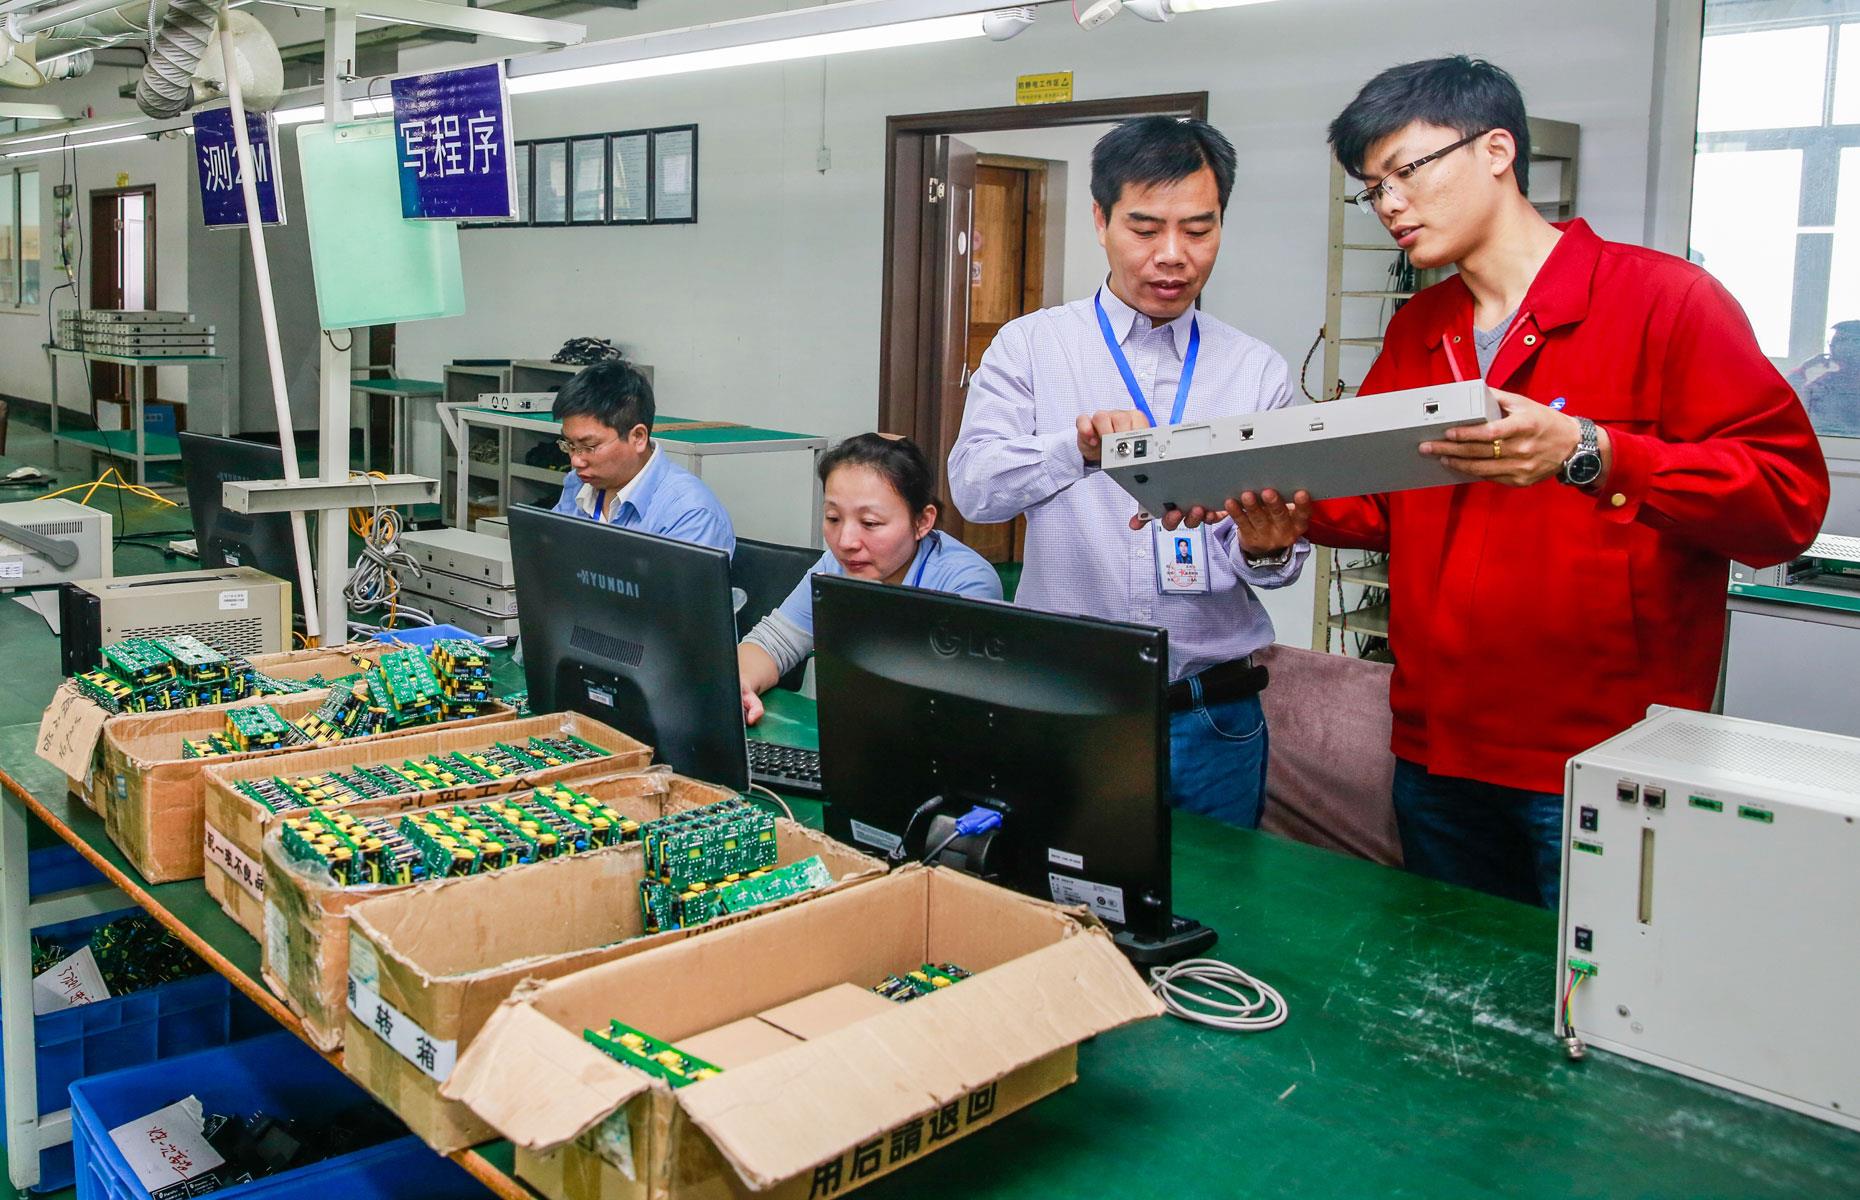 Tech worker in early 21st-century China: 10 hours a day, 297 days a year